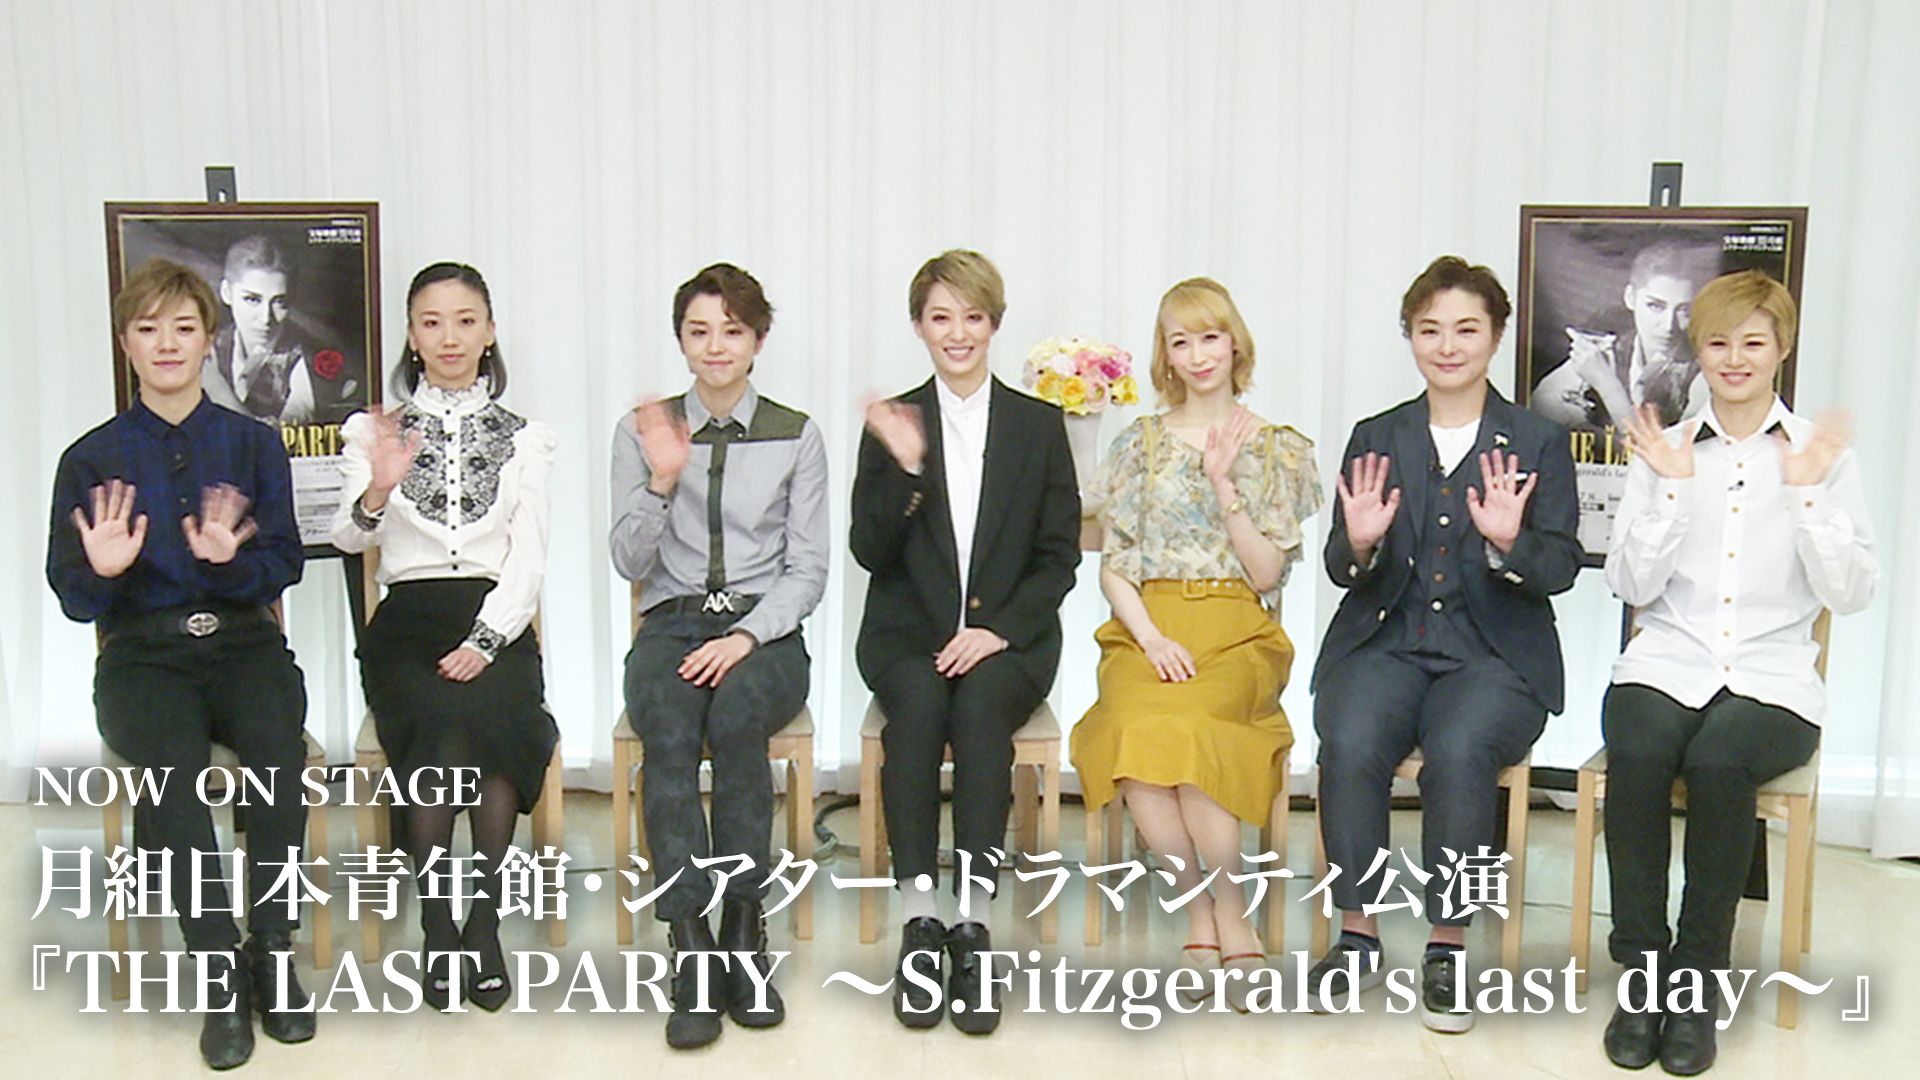 NOW ON STAGE 月組日本青年館・シアター・ドラマシティ公演『THE LAST PARTY 〜S.Fitzgerald's last day〜』